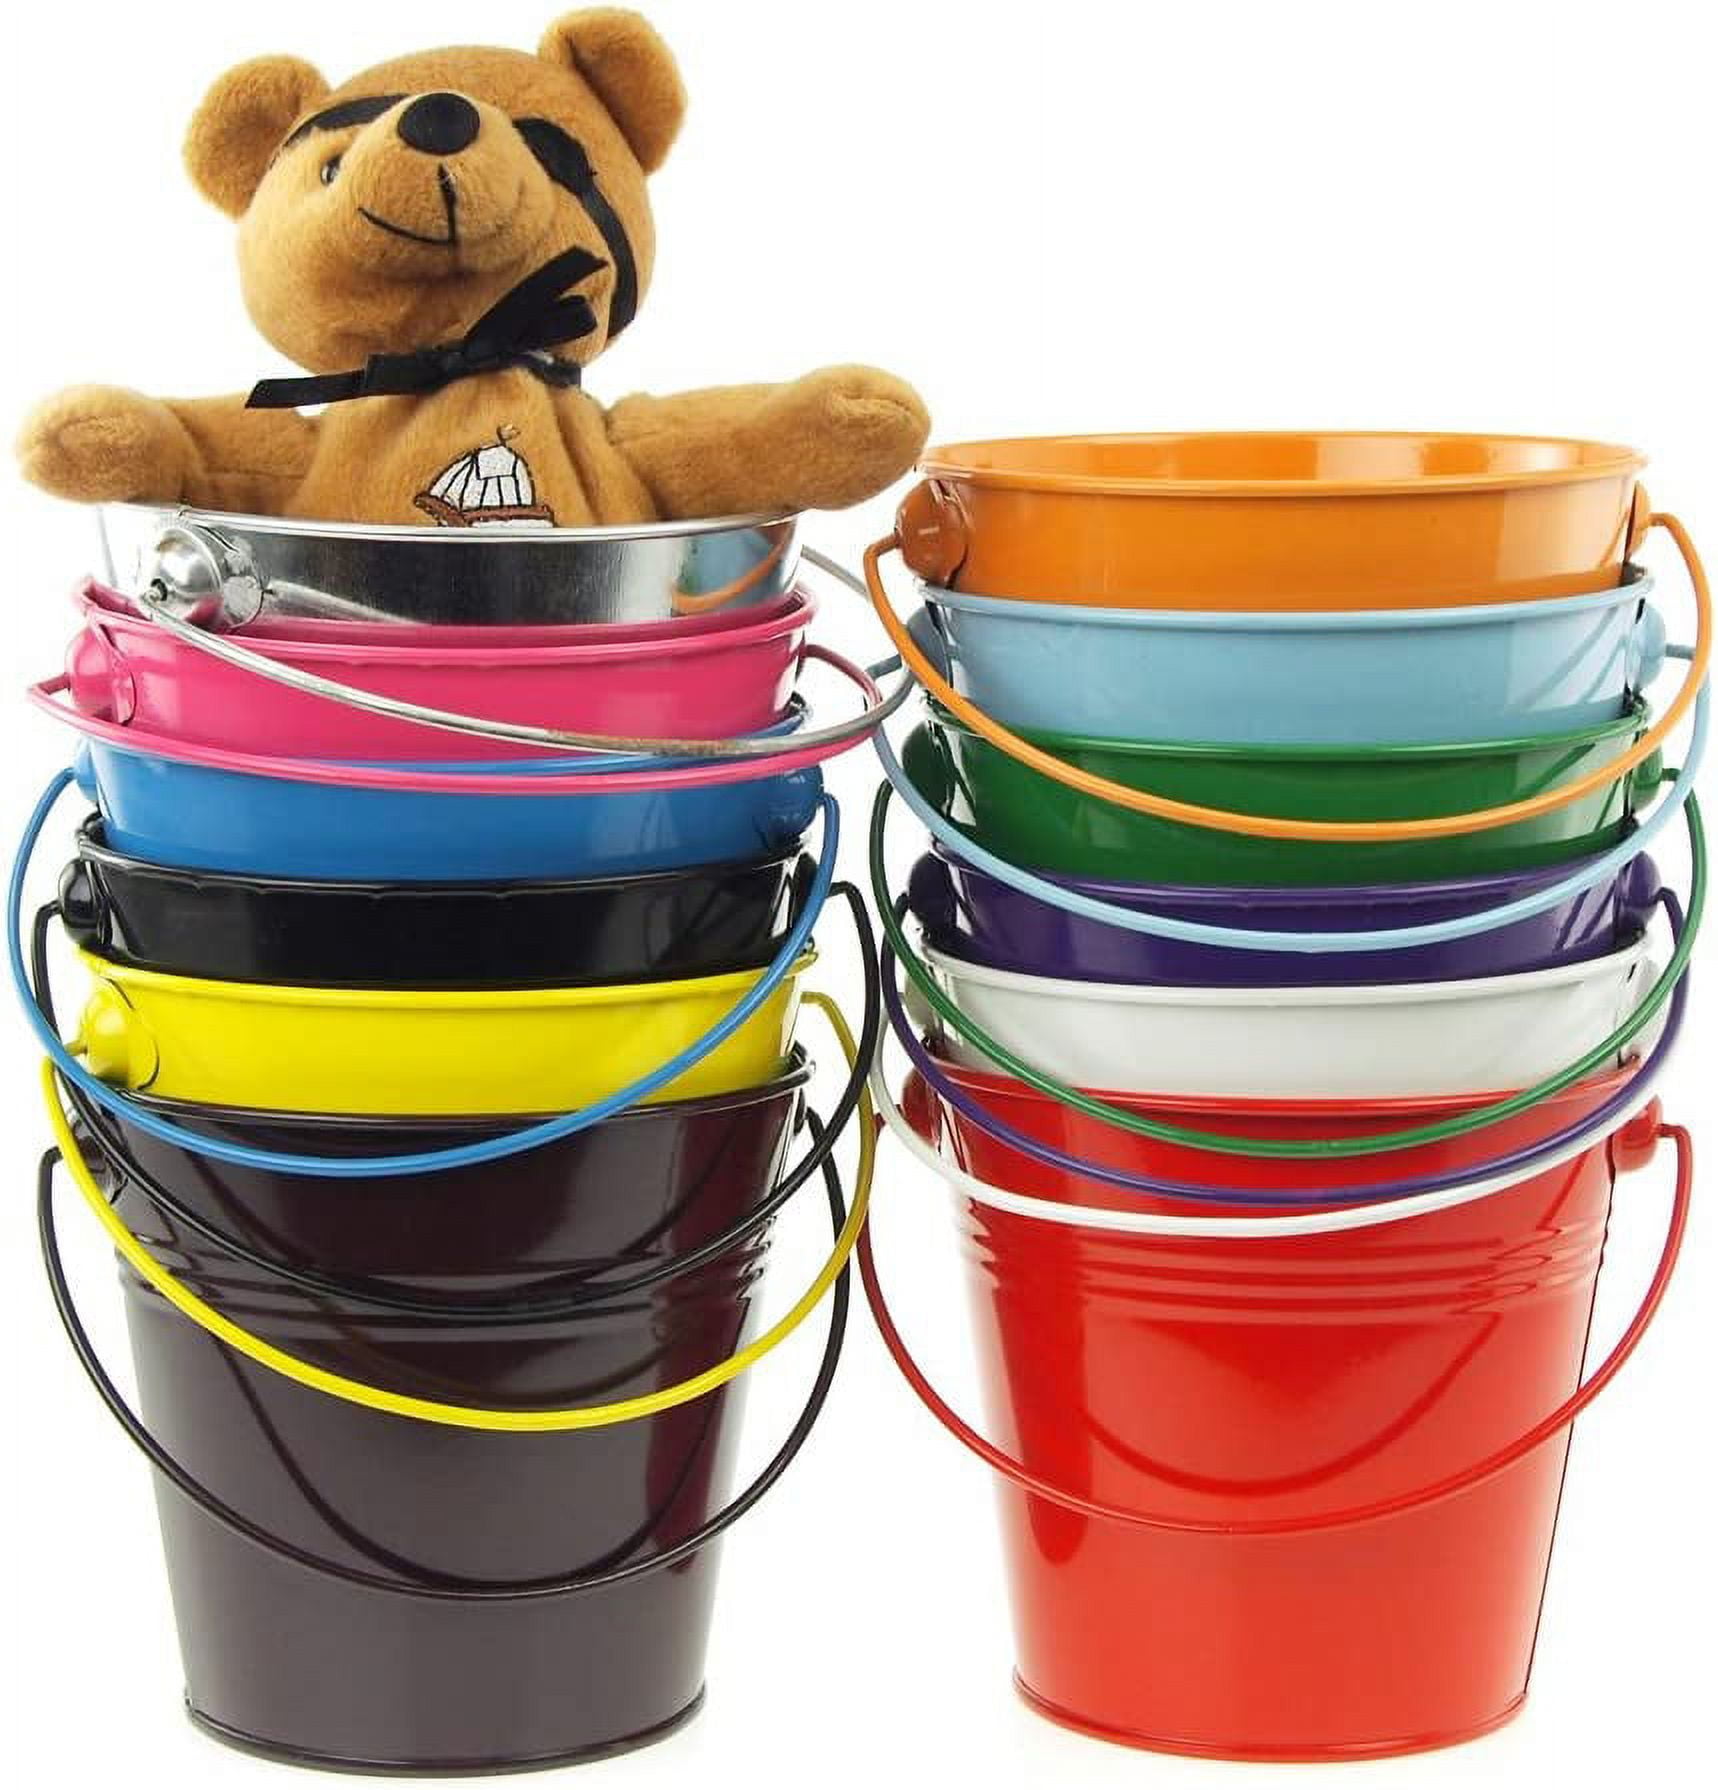 2Pcs 5x4 Small Metal Bucket Colorful Mini Buckets with Handles